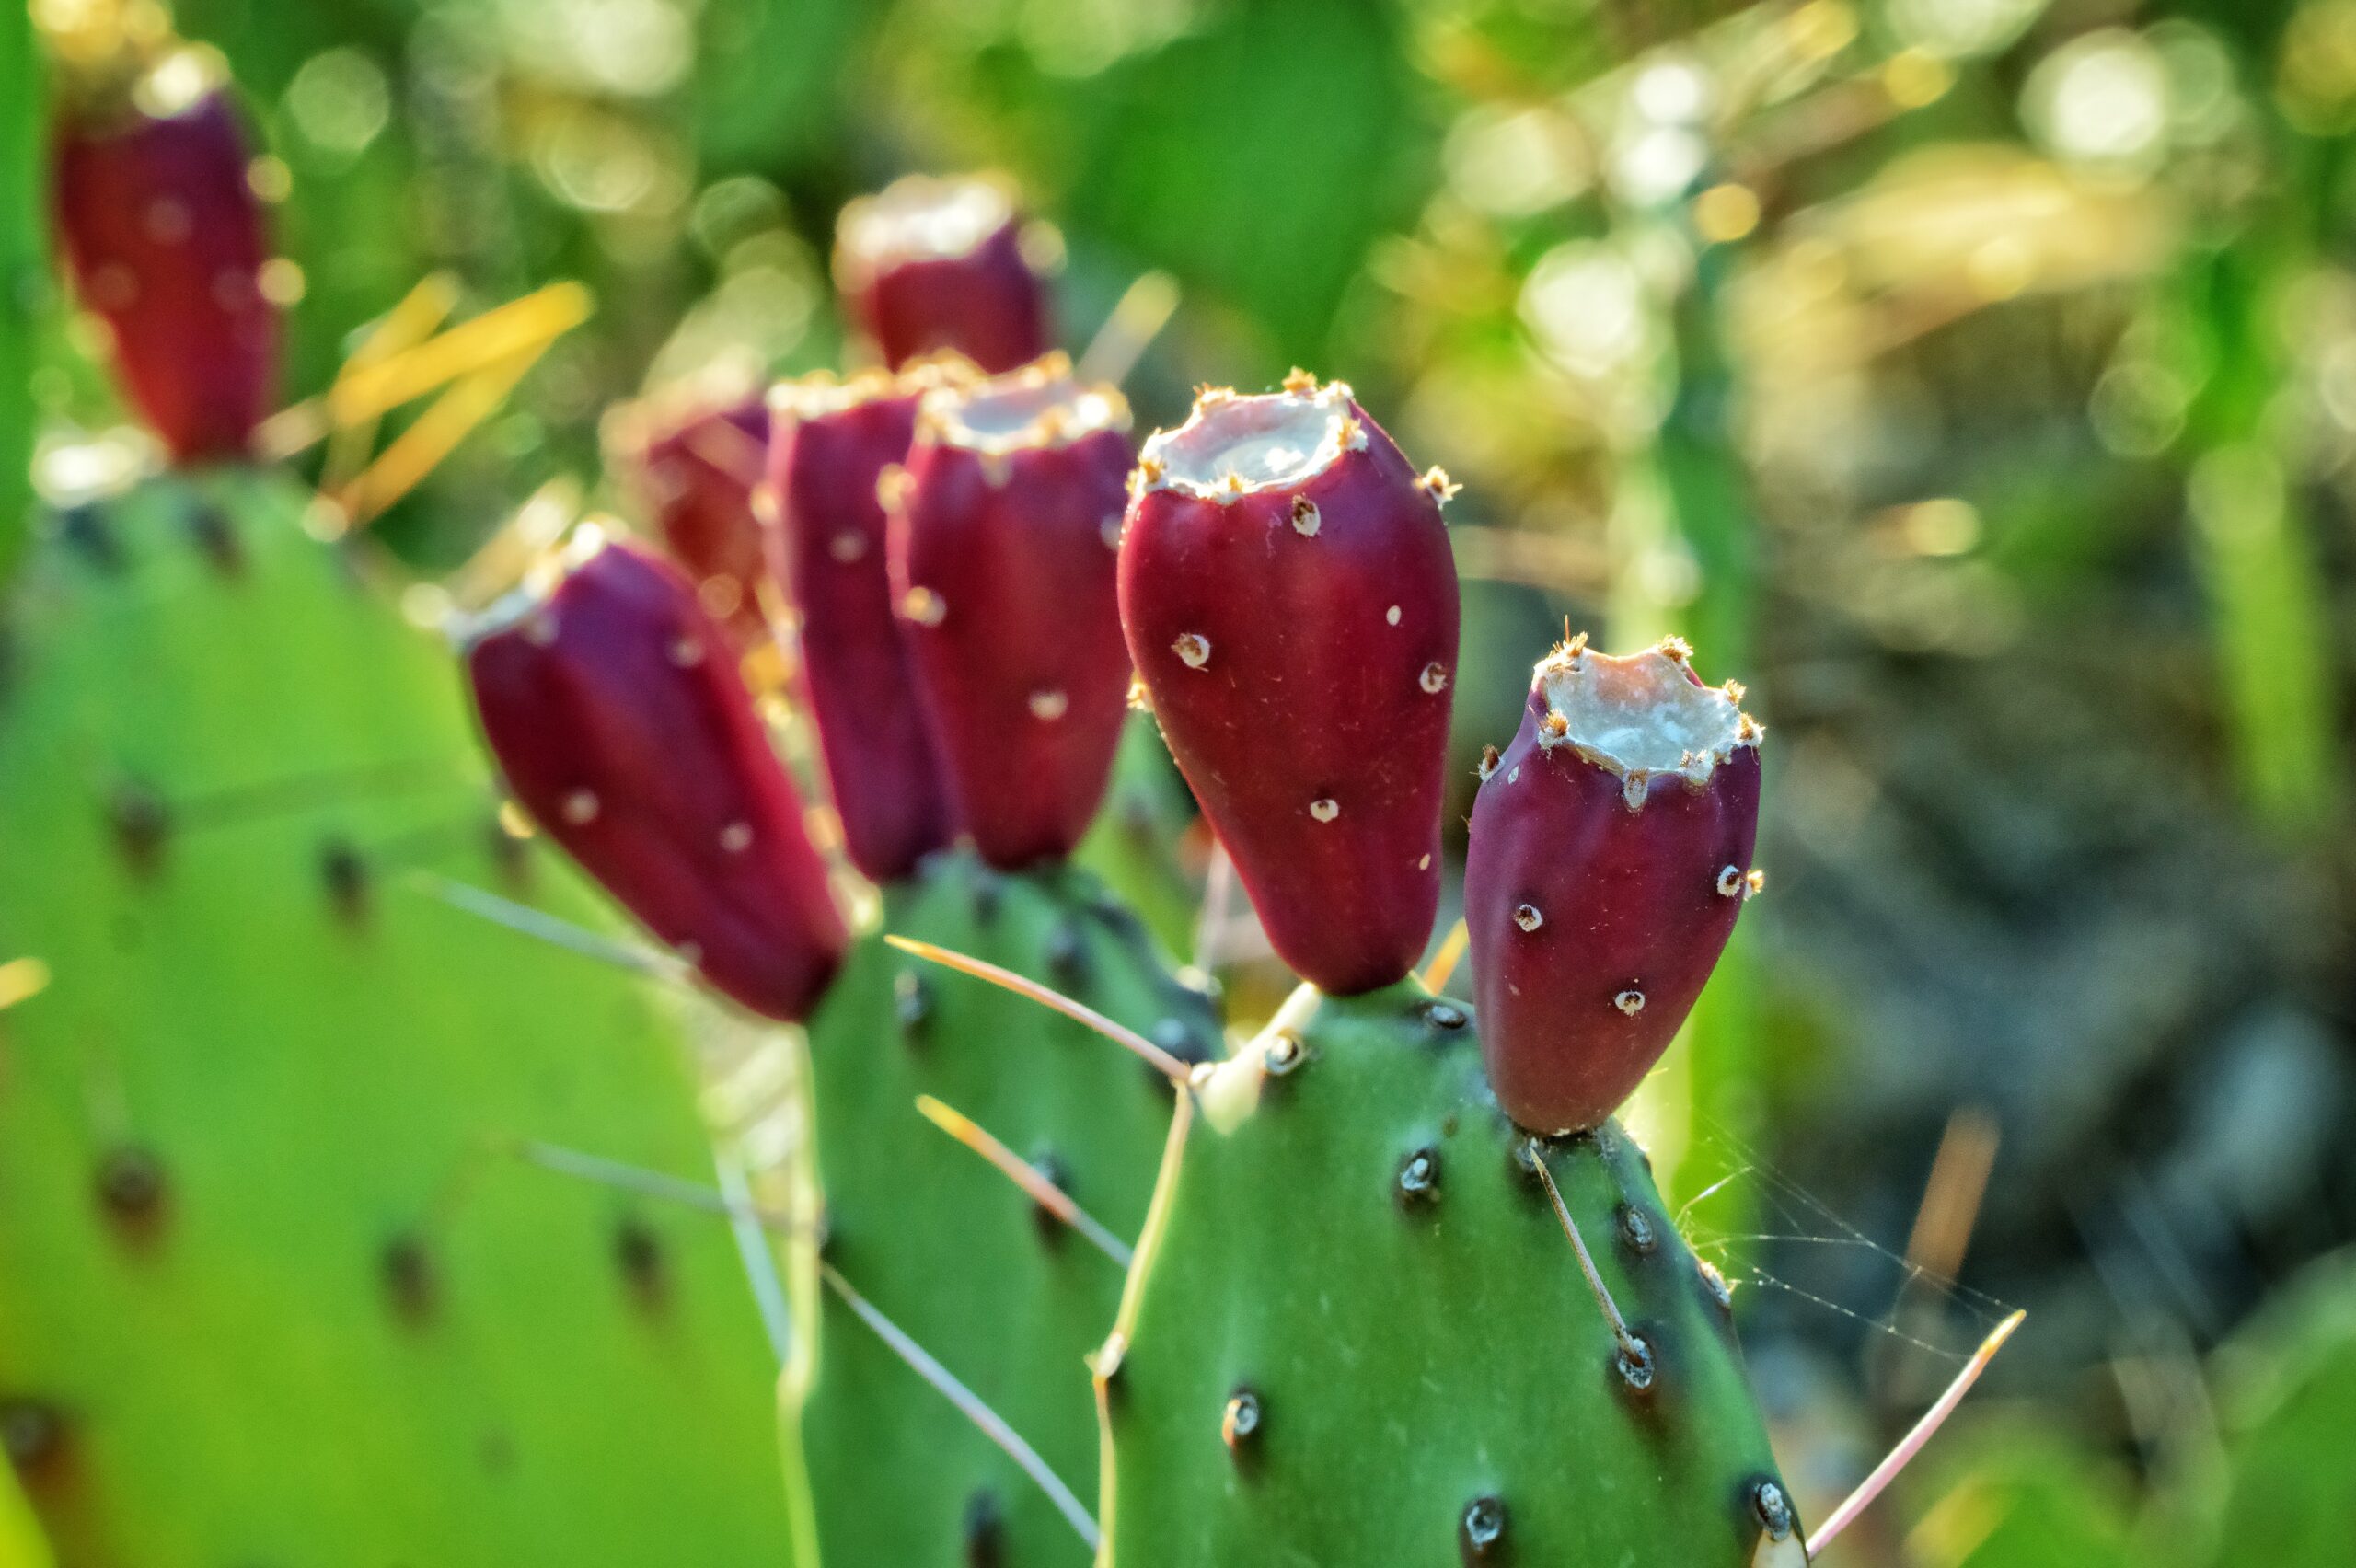 Prickly pear cactus fruits